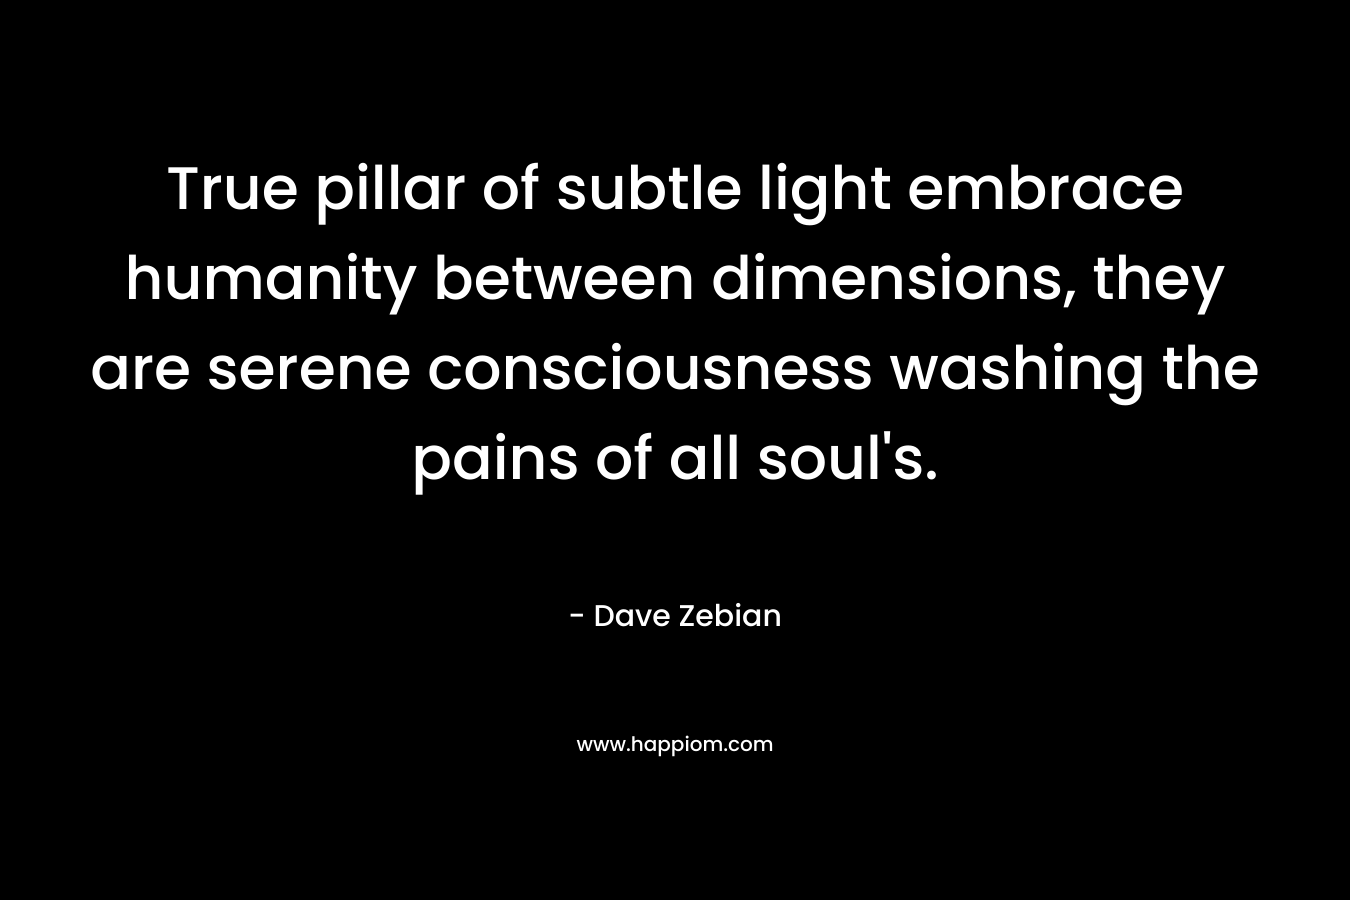 True pillar of subtle light embrace humanity between dimensions, they are serene consciousness washing the pains of all soul’s. – Dave Zebian